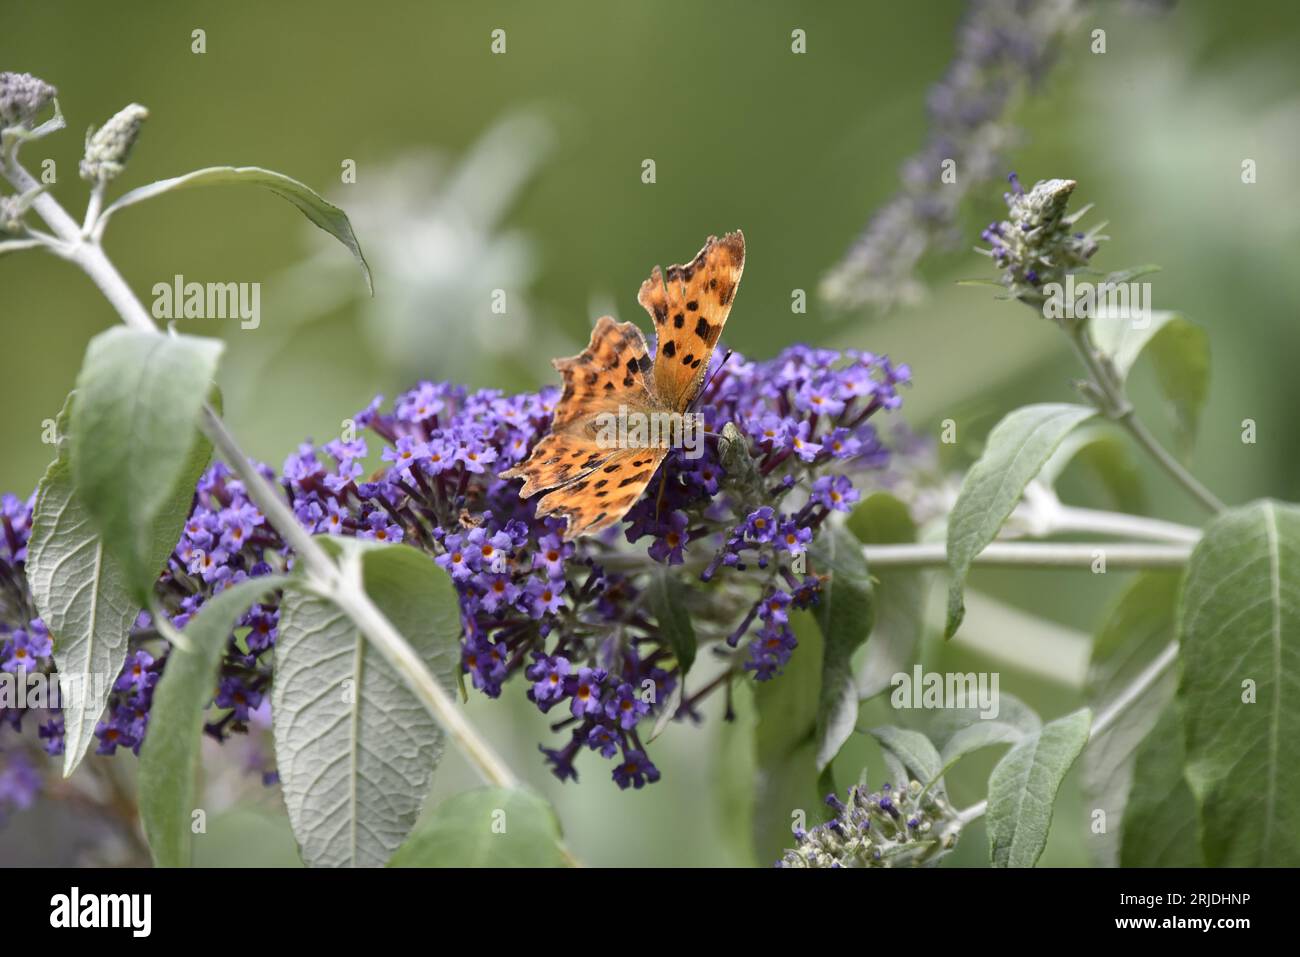 Comma Butterfly (Polygonia c-album) on Purple Buddleia with Proboscis in Flower, Facing to Right of Image, taken in Staffordshire, UK in August Stock Photo